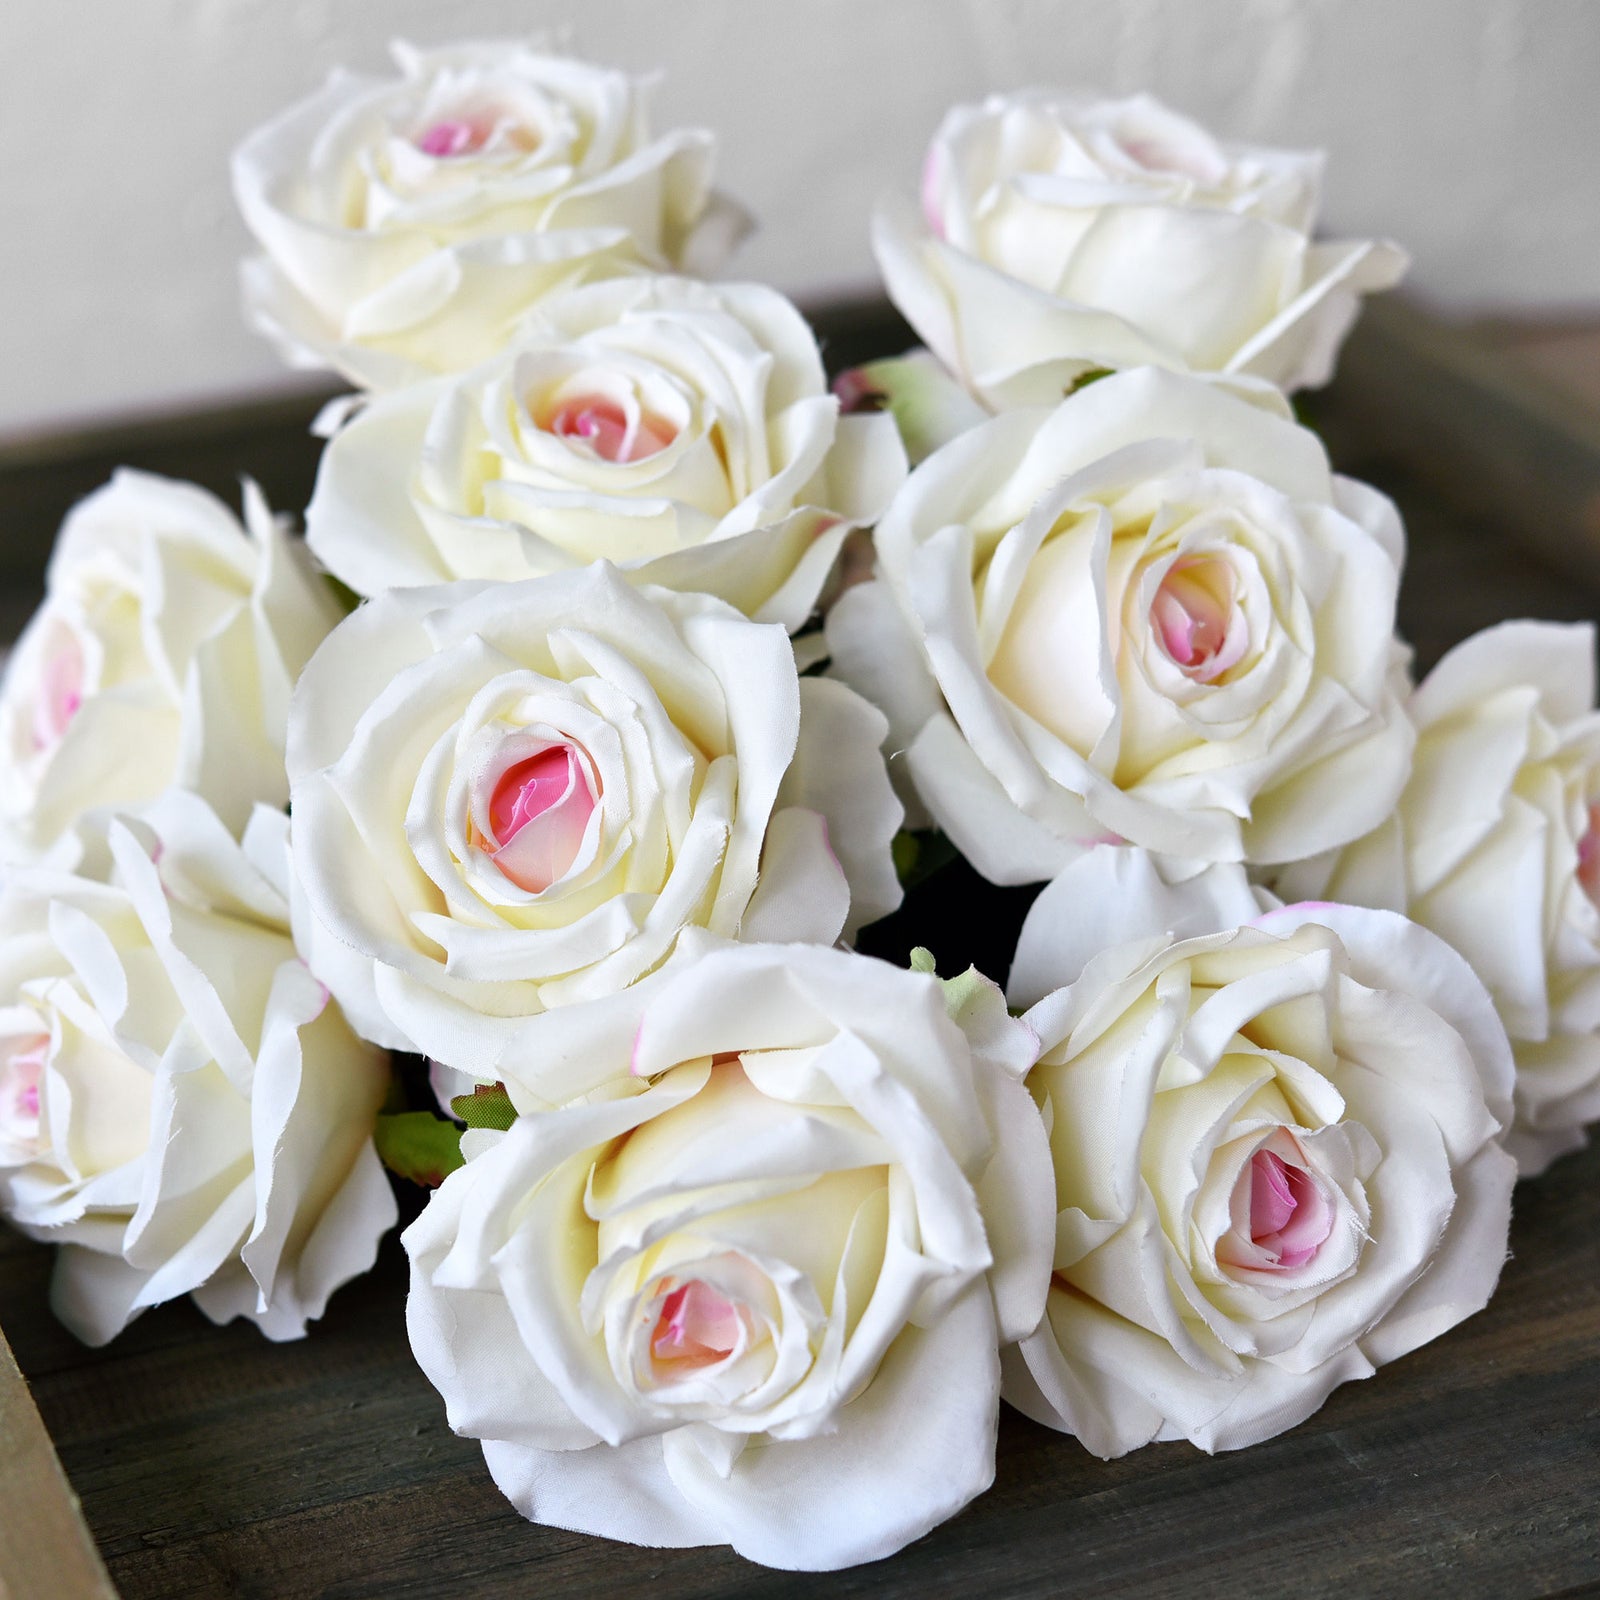 1 Bundle Full Bloom Silk White with Pink Roses Artificial Flowers, Home Décor, Wedding, Bridal FiveSeasonStuff